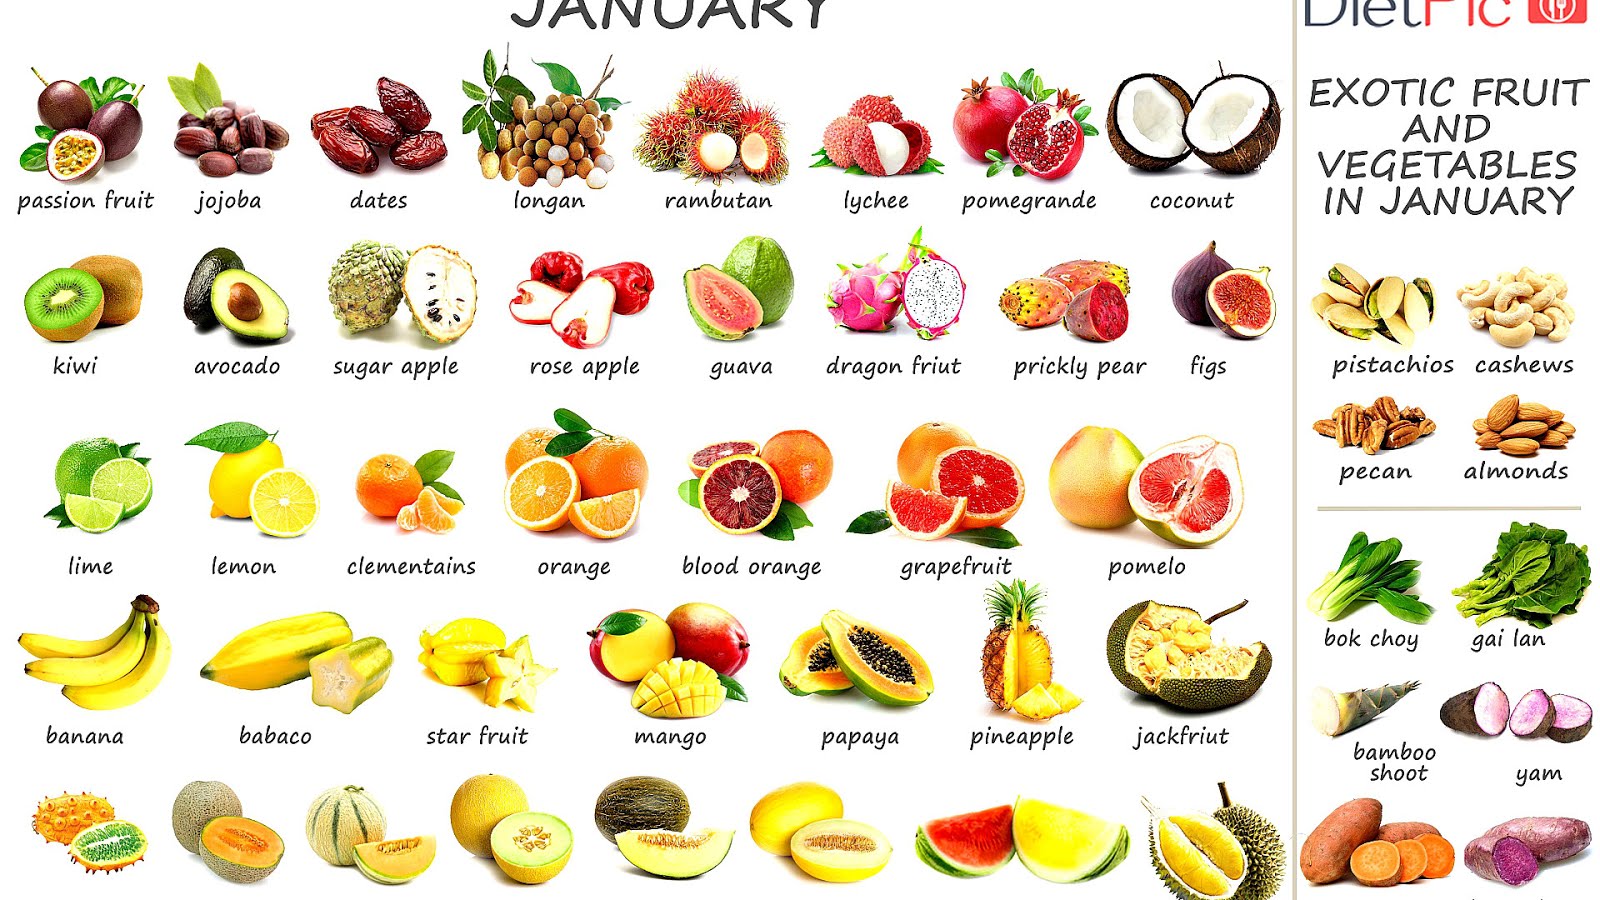 Seasons For Fruits And Vegetables Chart - Vege Choices